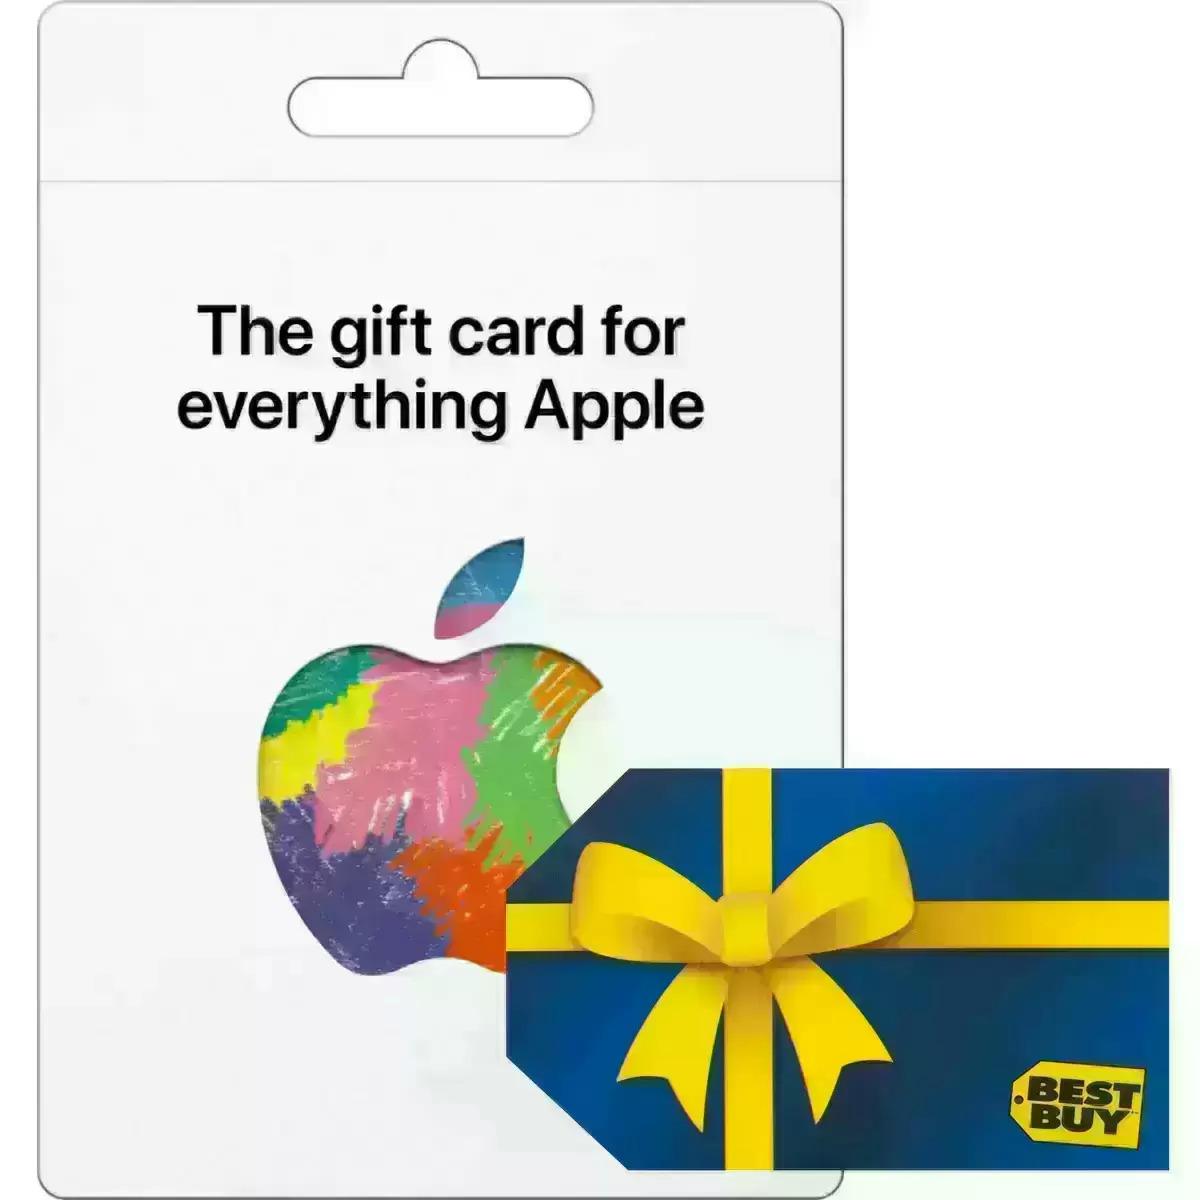 $100 Apple Gift Card with a $10 Best Buy e-Gift Card for $100